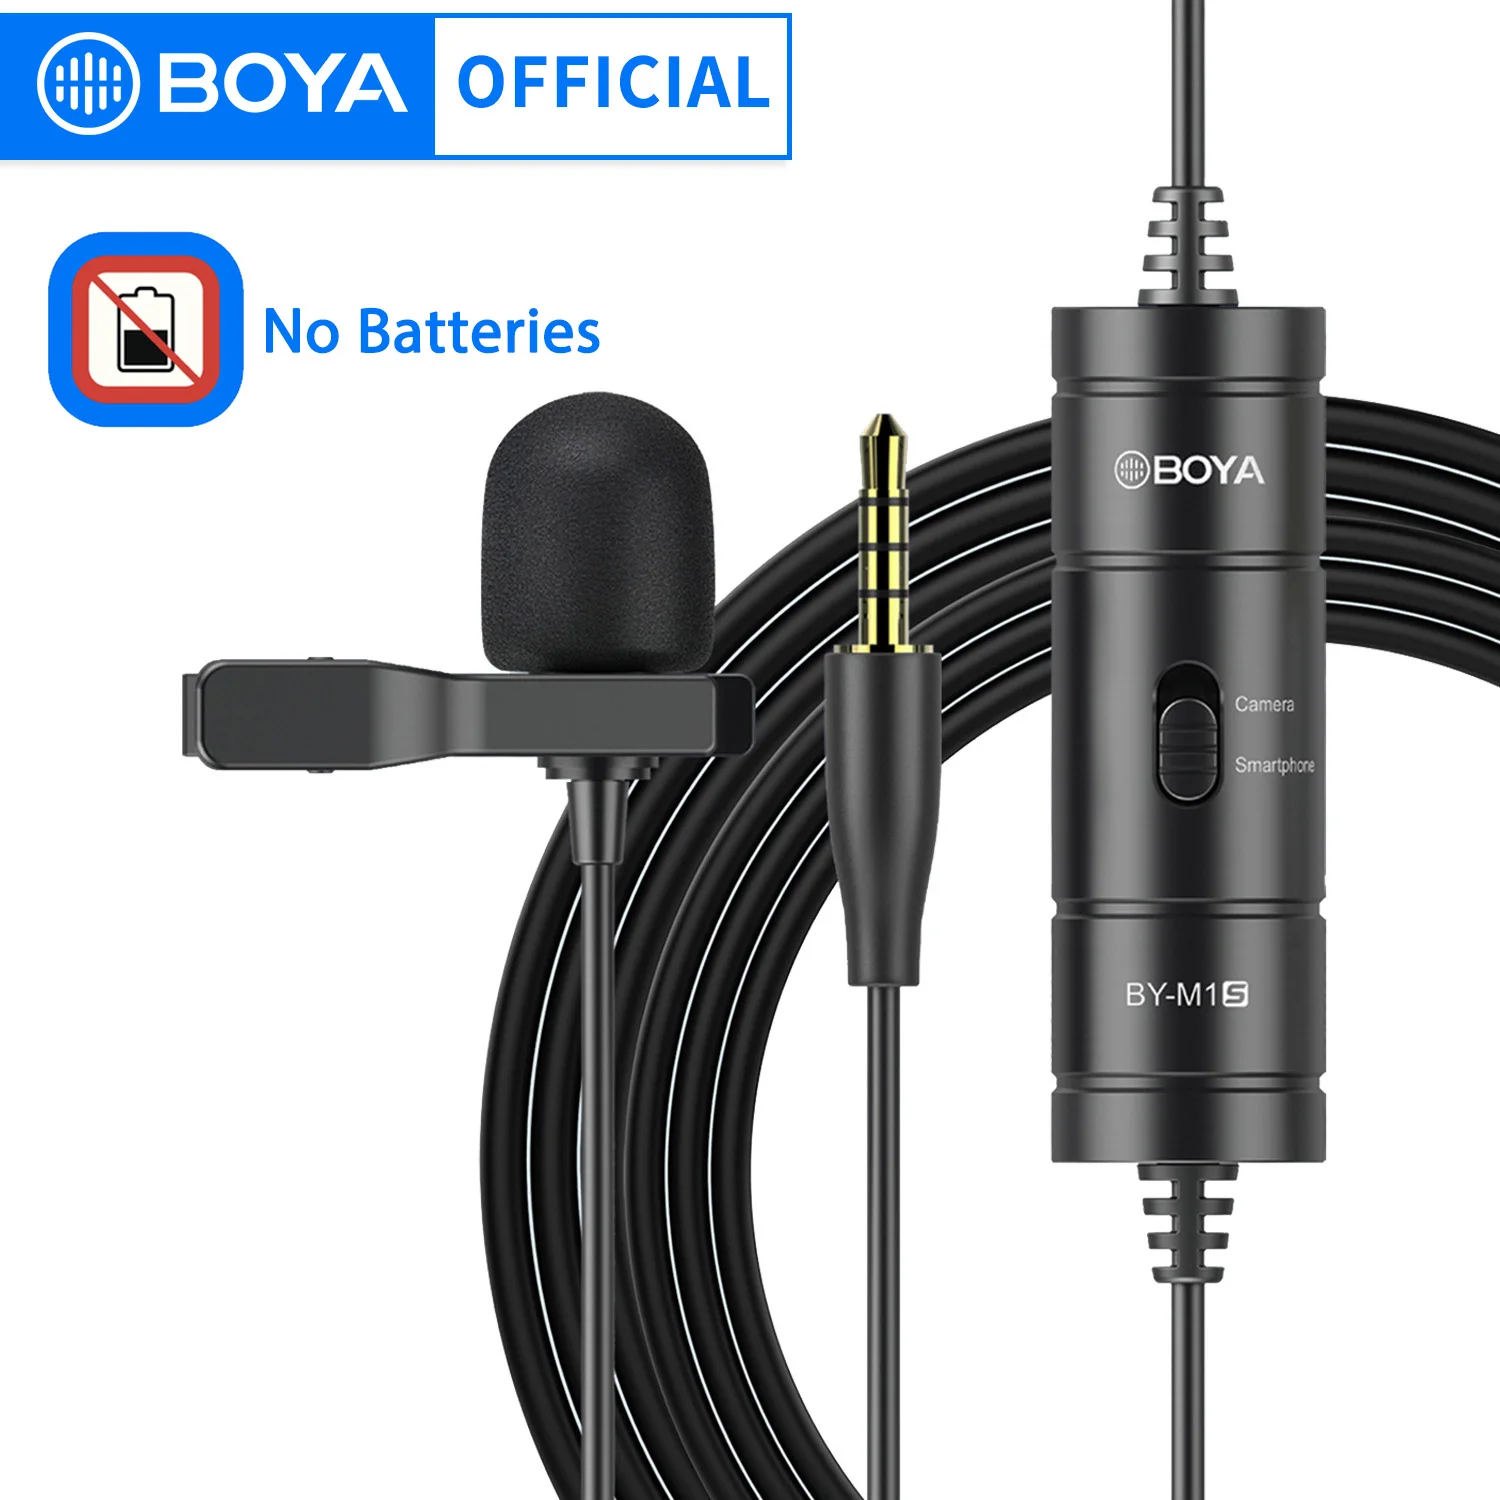 

BOYA BY-M1S 3.5mm TRRS Lavalier Microphone for Smartphone PC Camera Lapel Mic Recording Youtube Live Streaming 6M Cable VS BY-M1